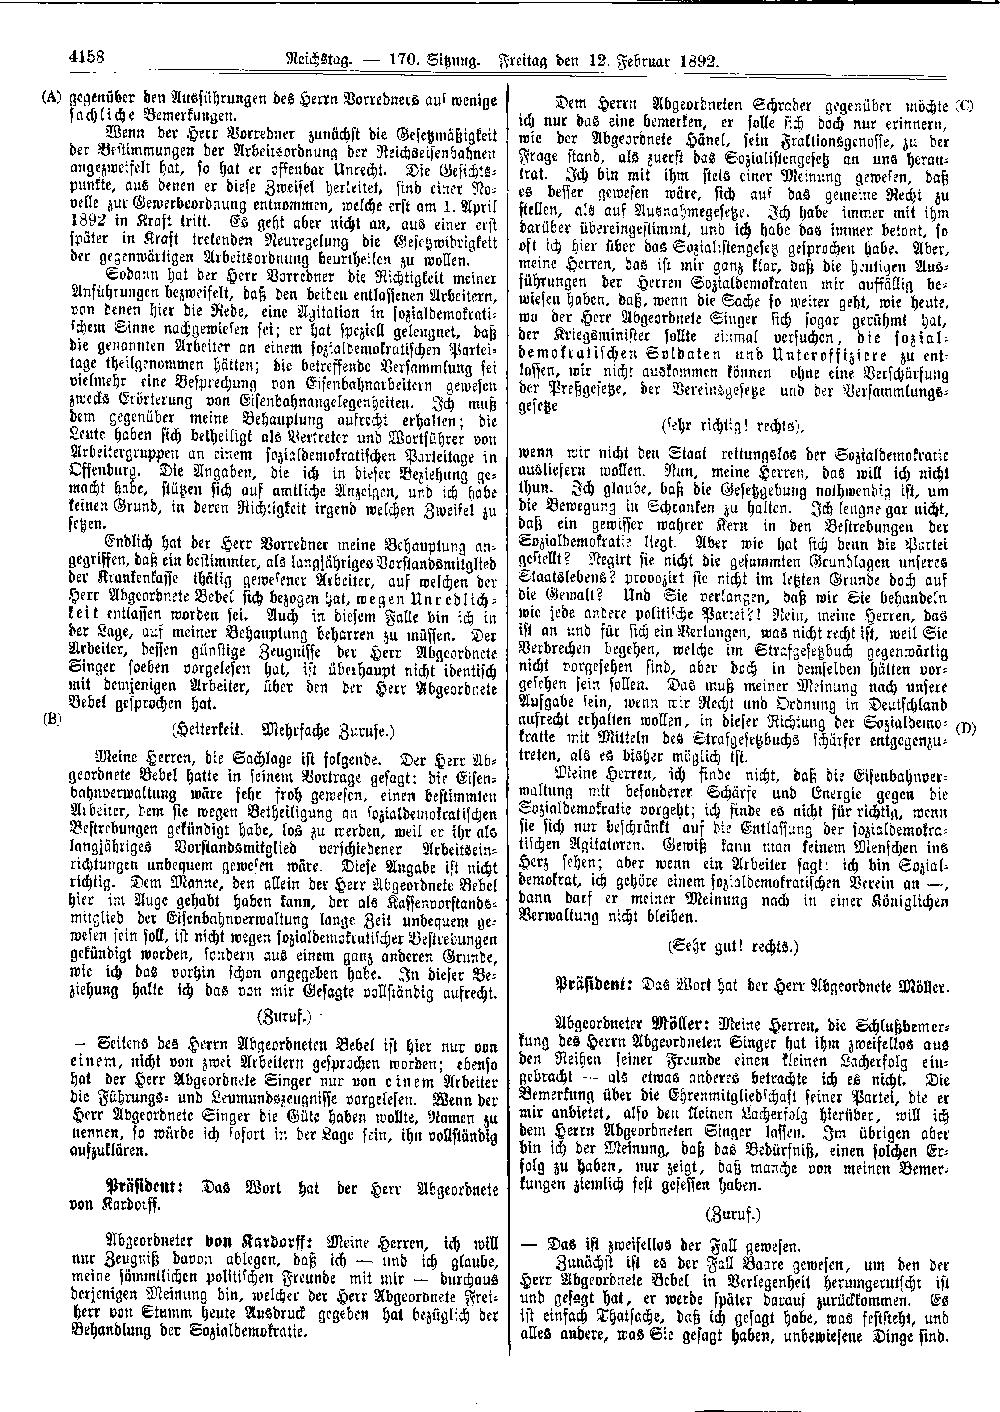 Scan of page 4158